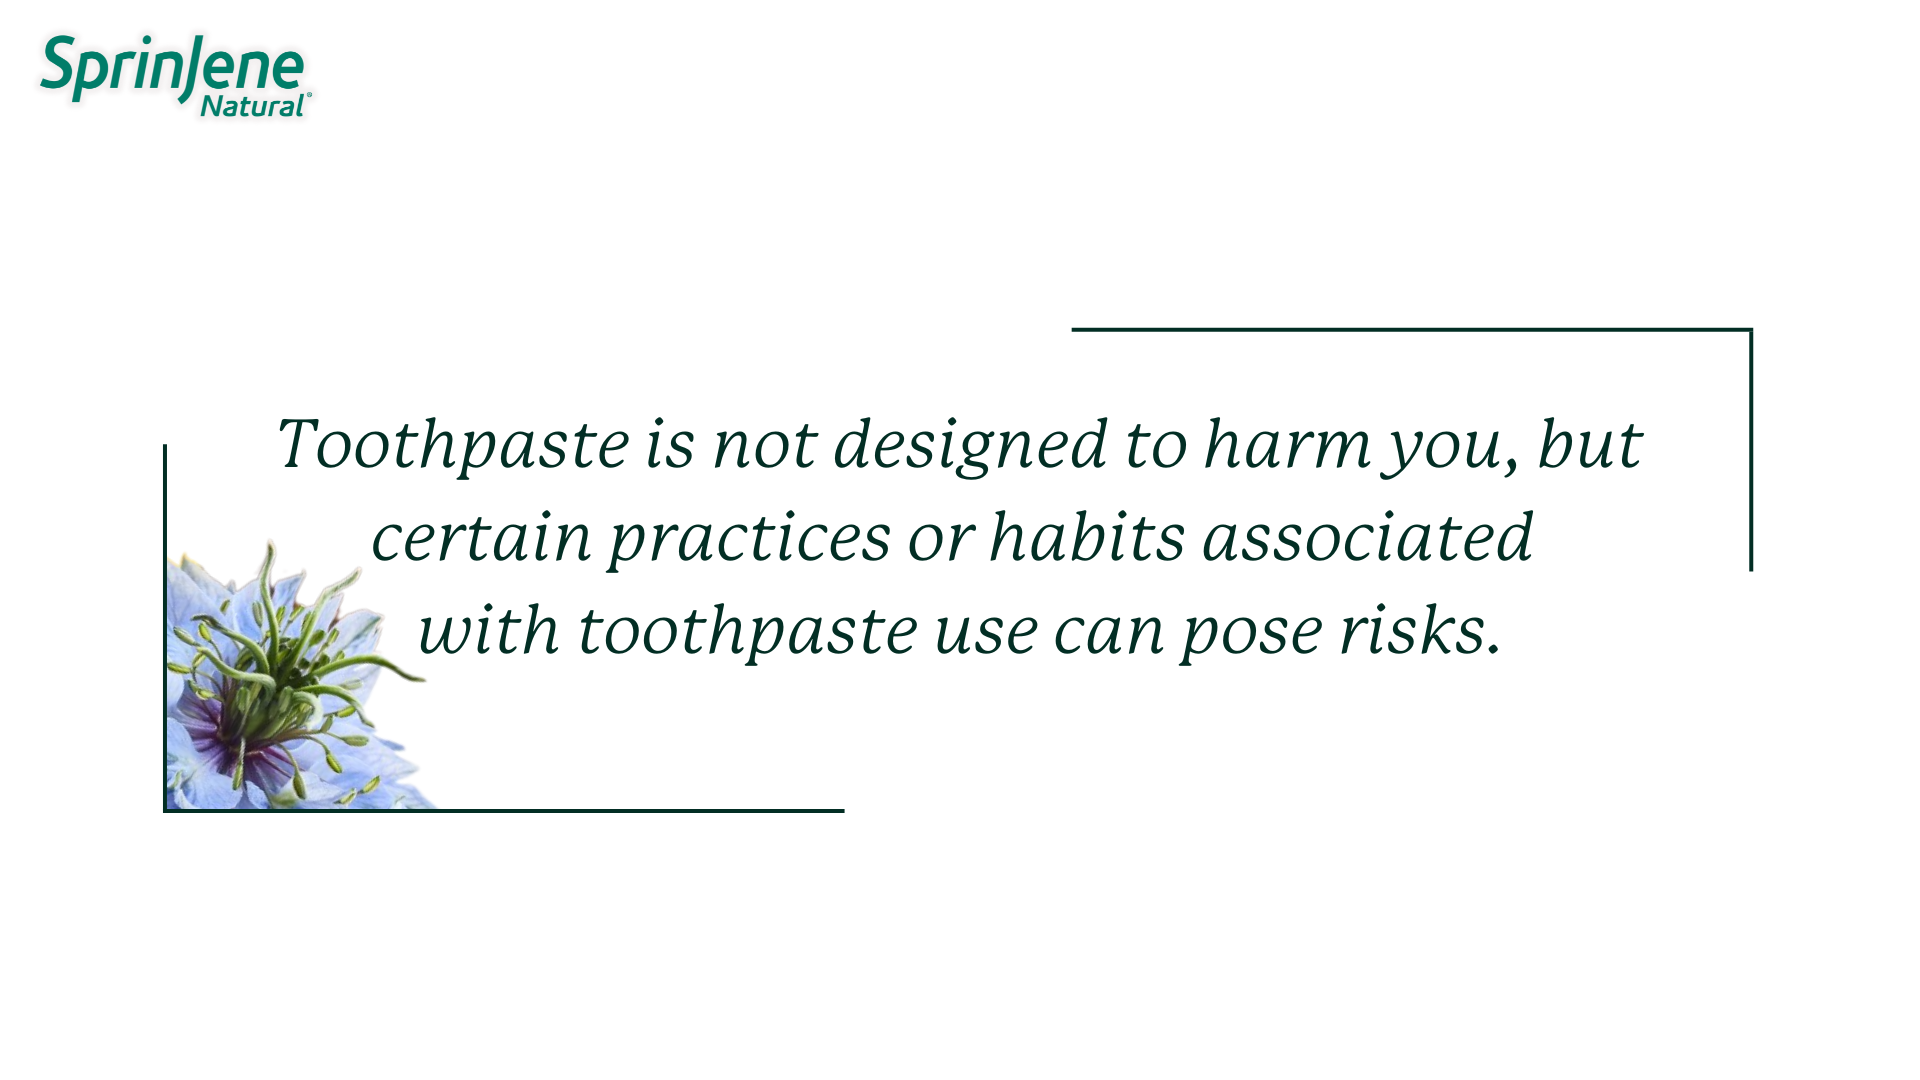 Toothpaste is not designed to harm you, but certain practices associate with toothpaste use  can pose risks.